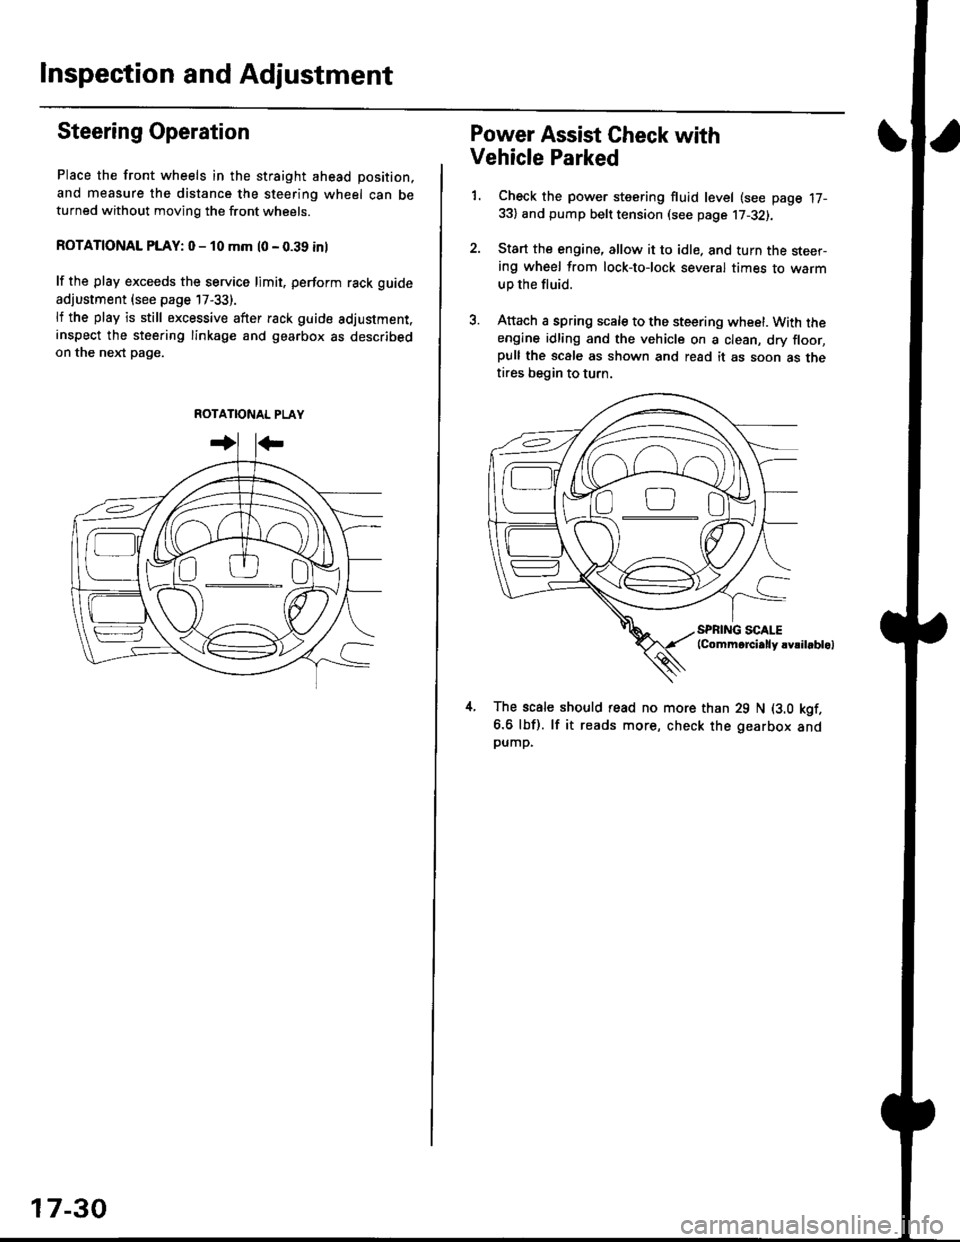 HONDA CIVIC 1999 6.G Workshop Manual Inspection and Adjustment
Steering Operation
Place the front wheels in the straight ahead position,
and measure the distance the steering wheel can beturned without moving the front wheels.
ROTATIONAL